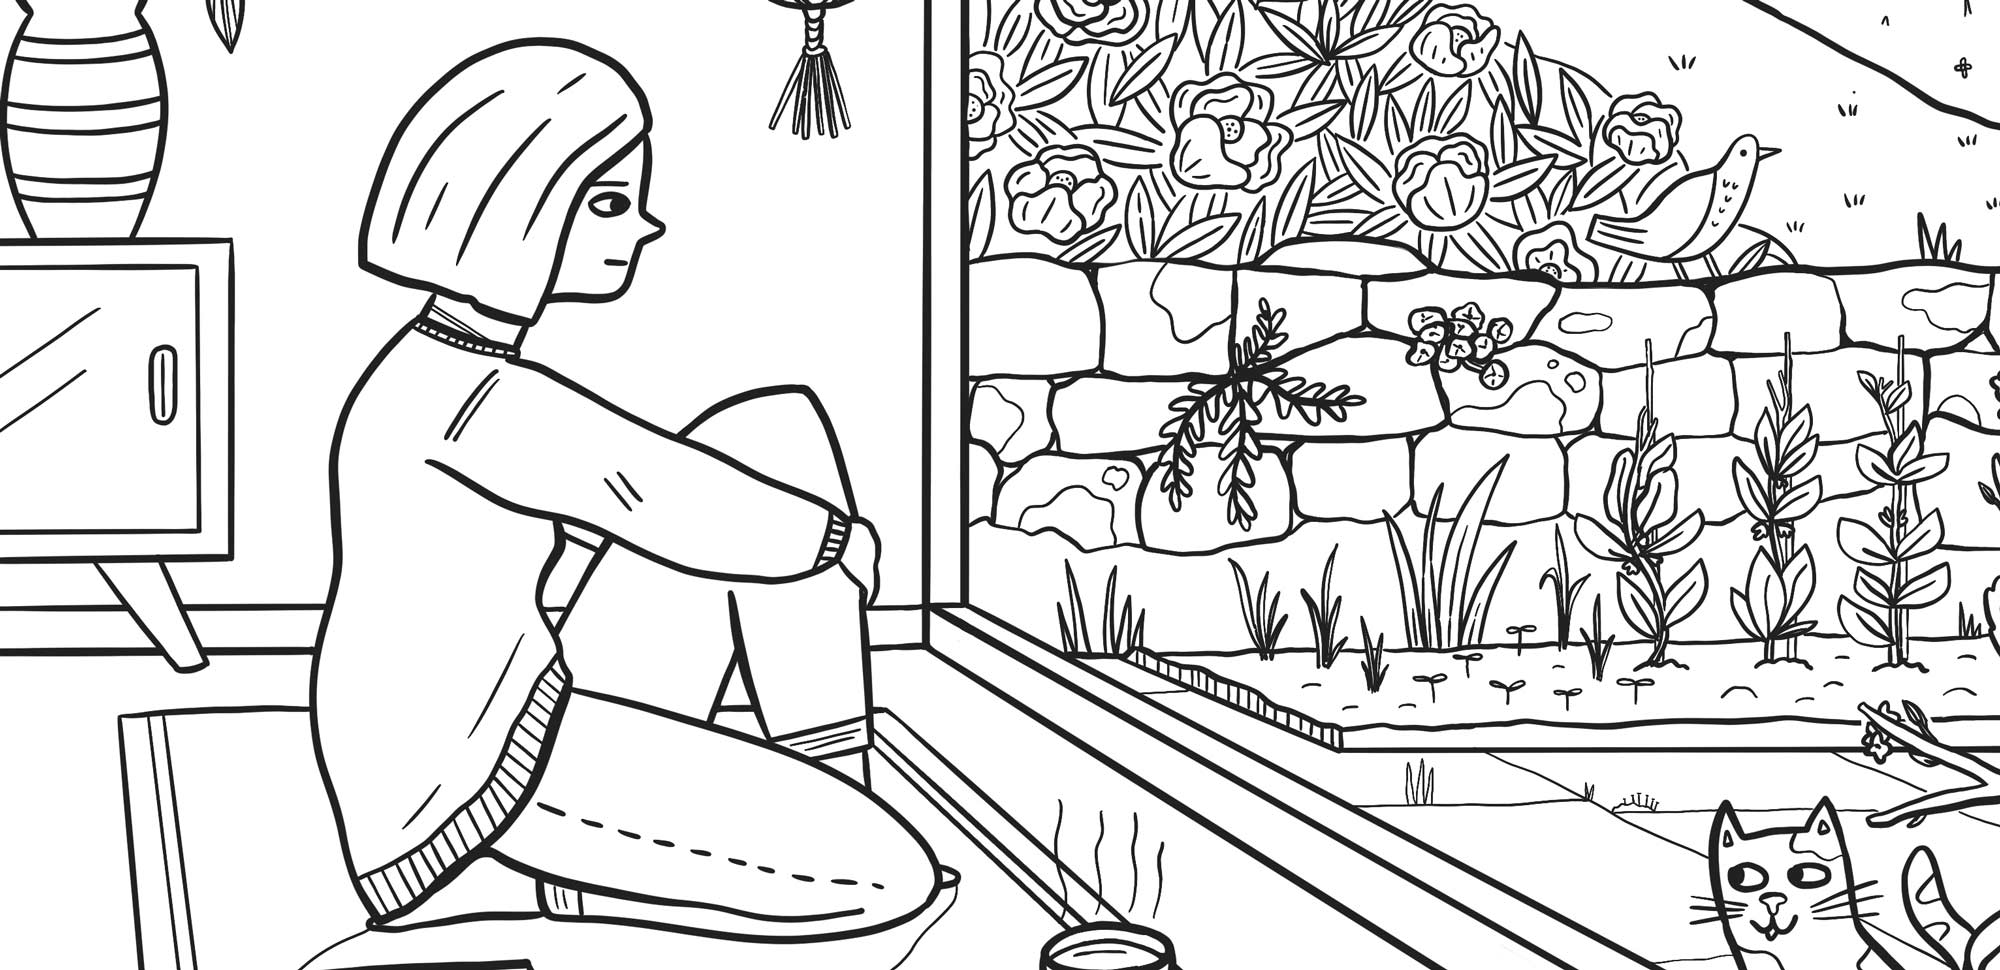 Section of Colouring Book for Millican by Elly Jahnz